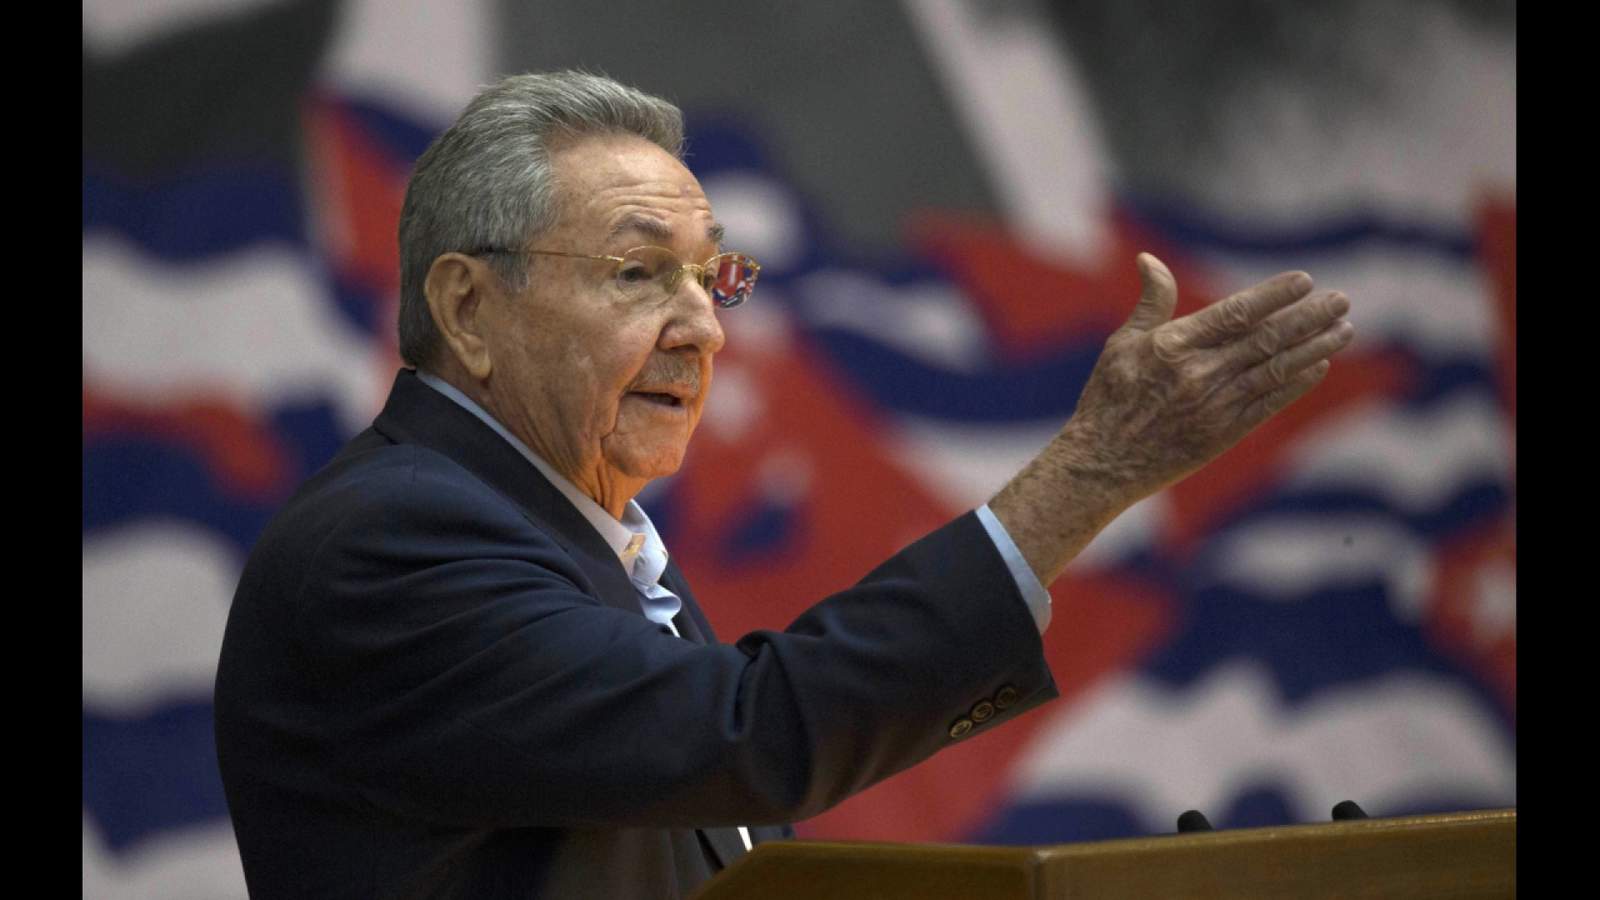 Raul Castro to step down as leader of Cuba’s ‘supreme body’